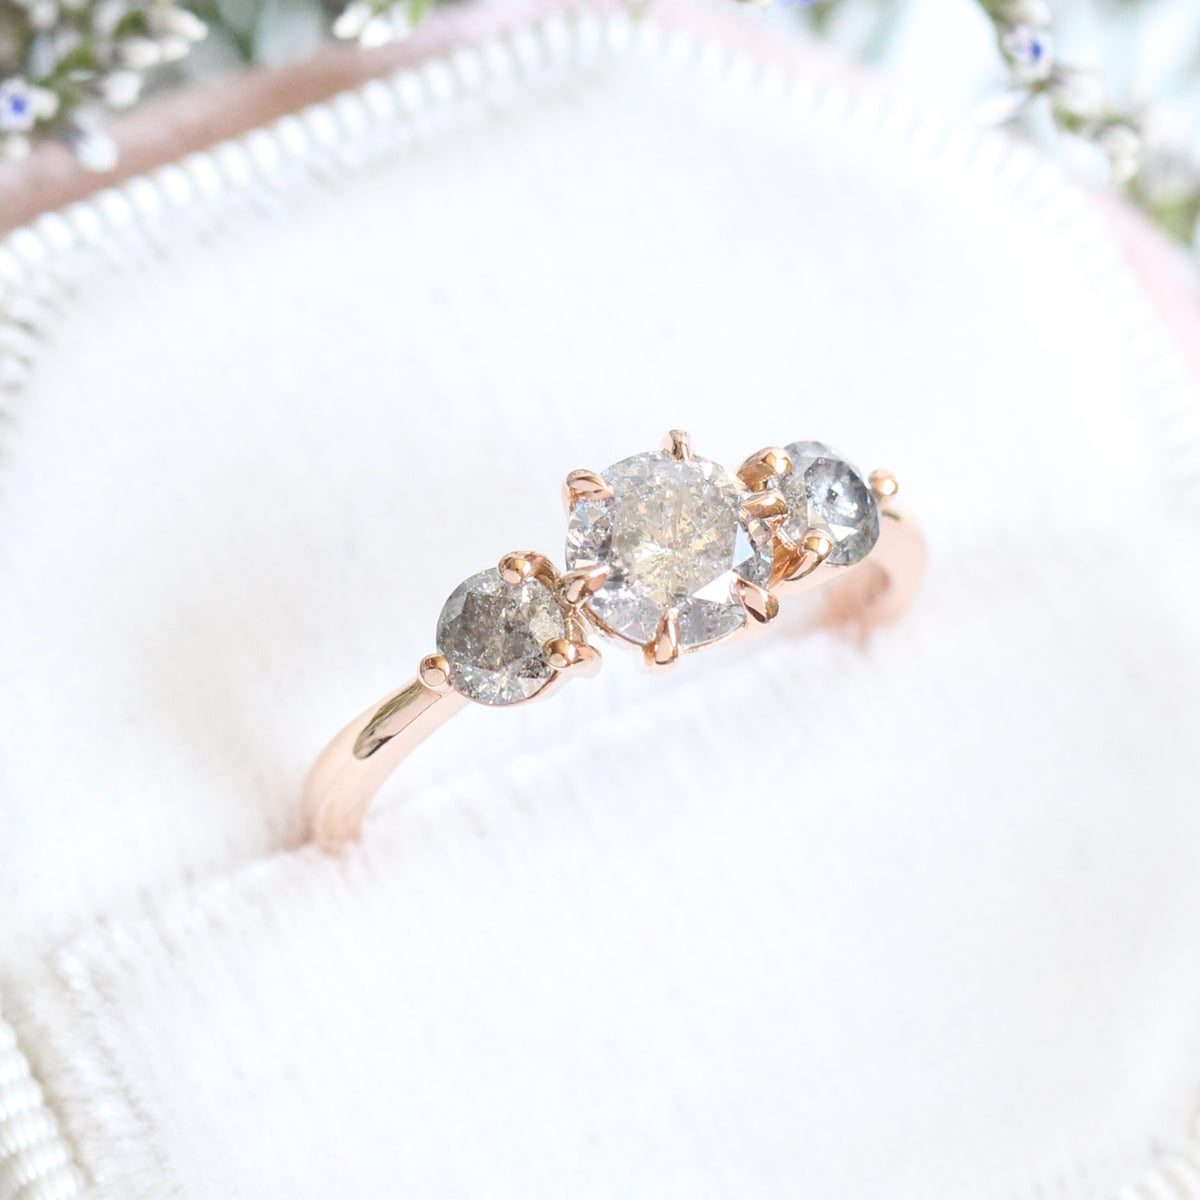 Salt and Pepper Gray Diamond Engagement Ring in Rose Gold 3 Stone Diamond Ring by La More Design Jewelry